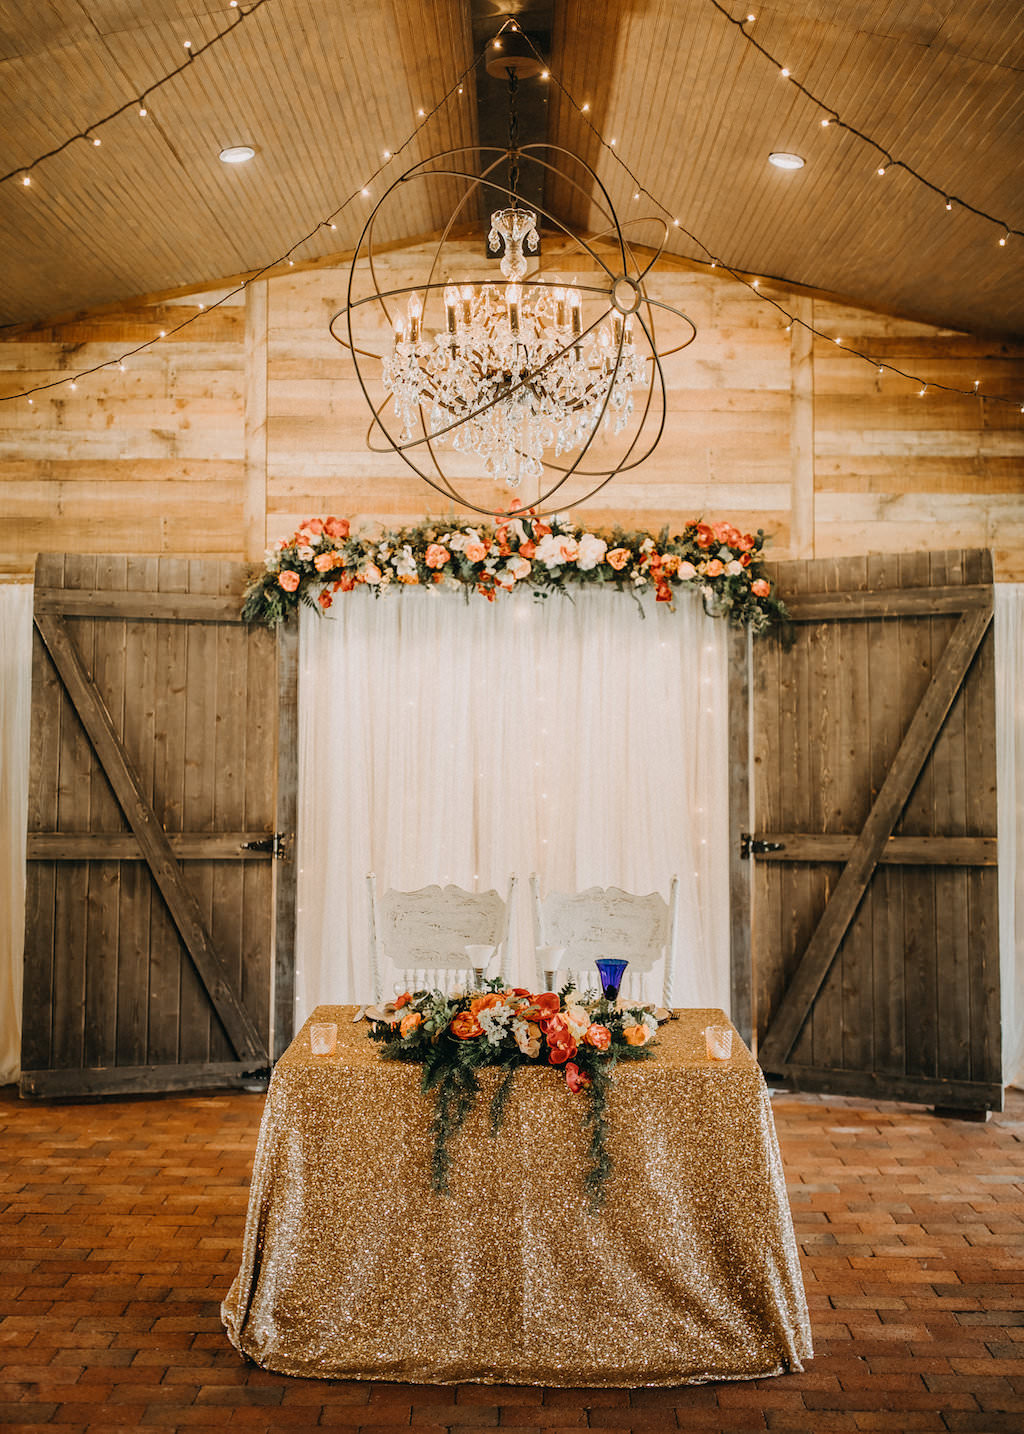 Glamorous Rustic Wedding Reception Decor, Sweetheart Table with Gold Sparkle Tablecloth, Tropical Floral Bouquet, White Wooden Chairs, Linen Drape Backdrop with Red, Orange, Pink, White and Greenery Flowers, String Lights and Chandelier | Tampa Bay Photographer Rad Red Creative | Rustic Venue Cross Creek Ranch